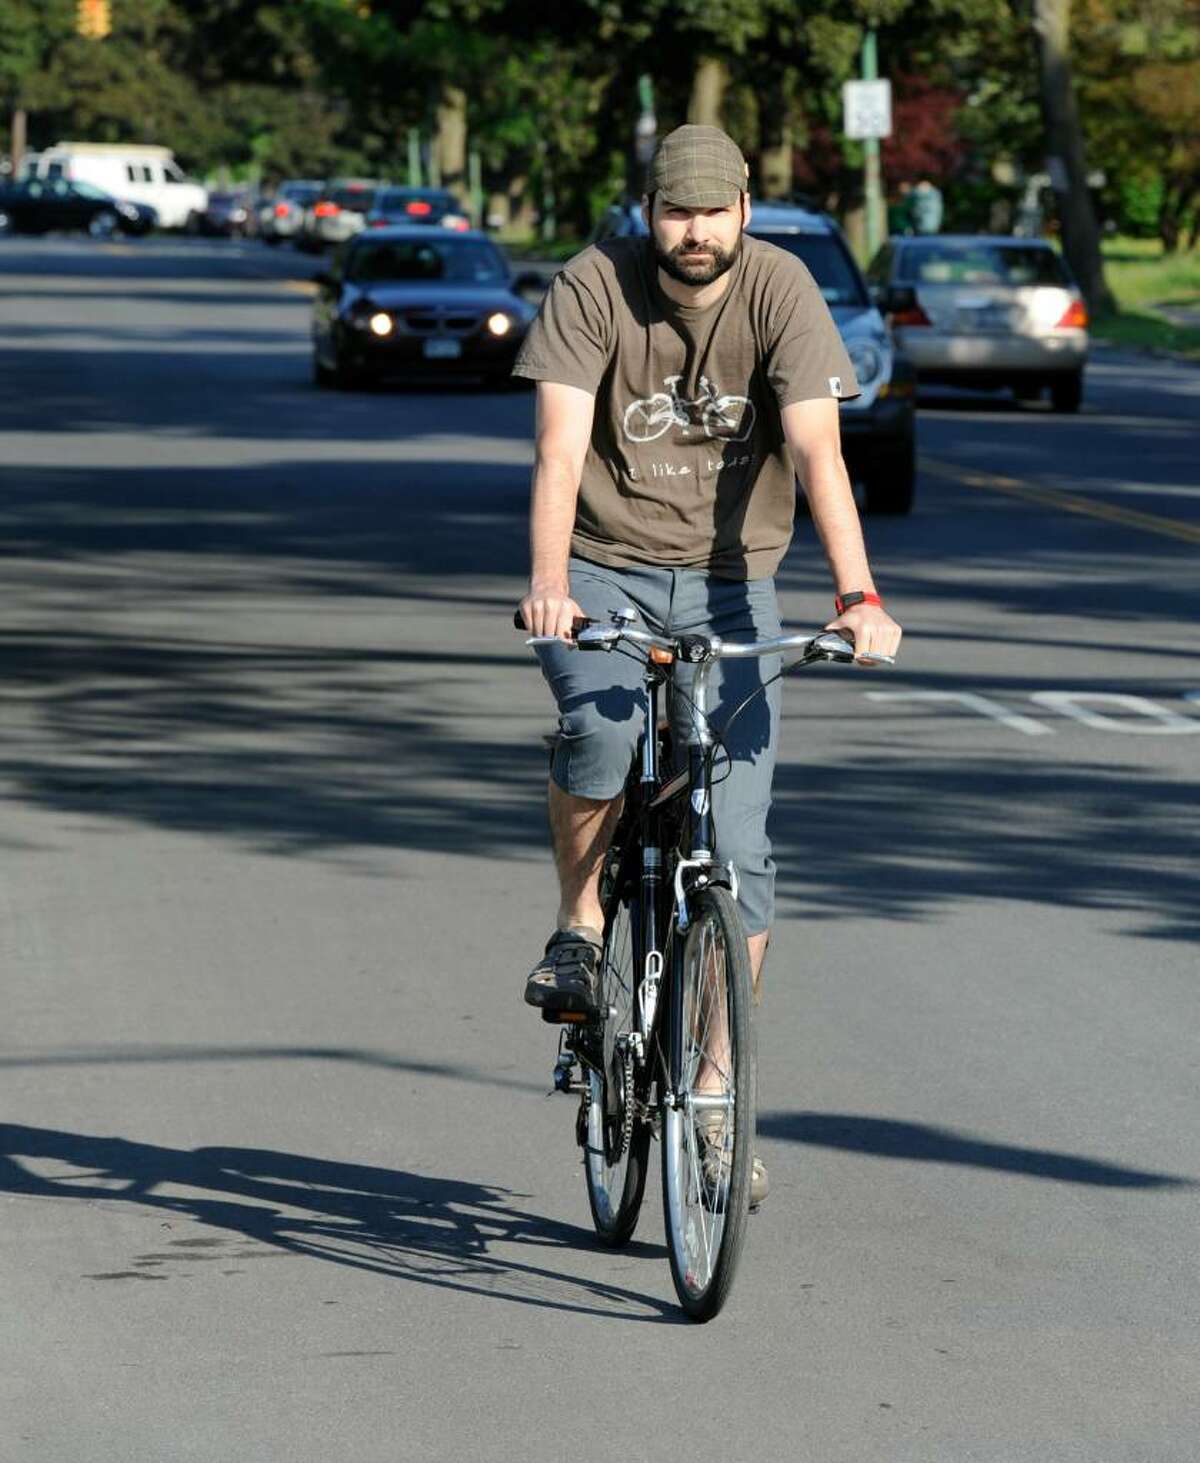 Ethan Georgi says he enjoys riding his bicycle to his Albany job. He is celebrating National Bike To Work Day. ( Skip Dickstein / Times Union)